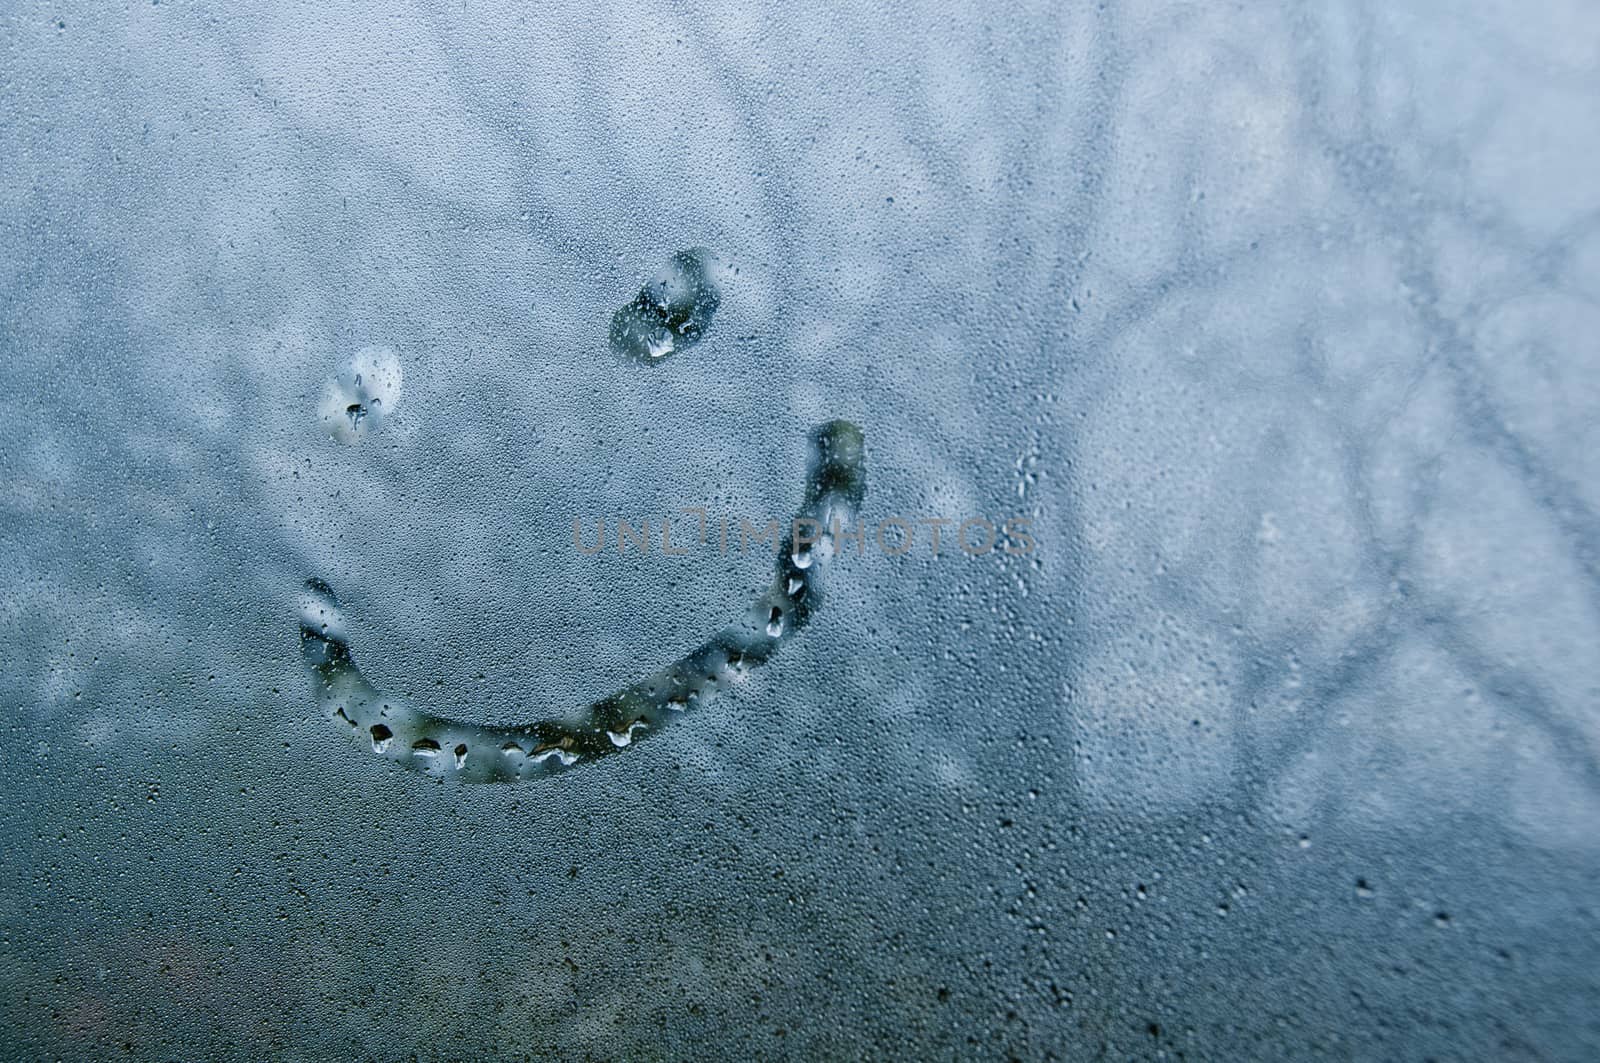 Smiley shape on droplet window of cold misty morning by eyeofpaul